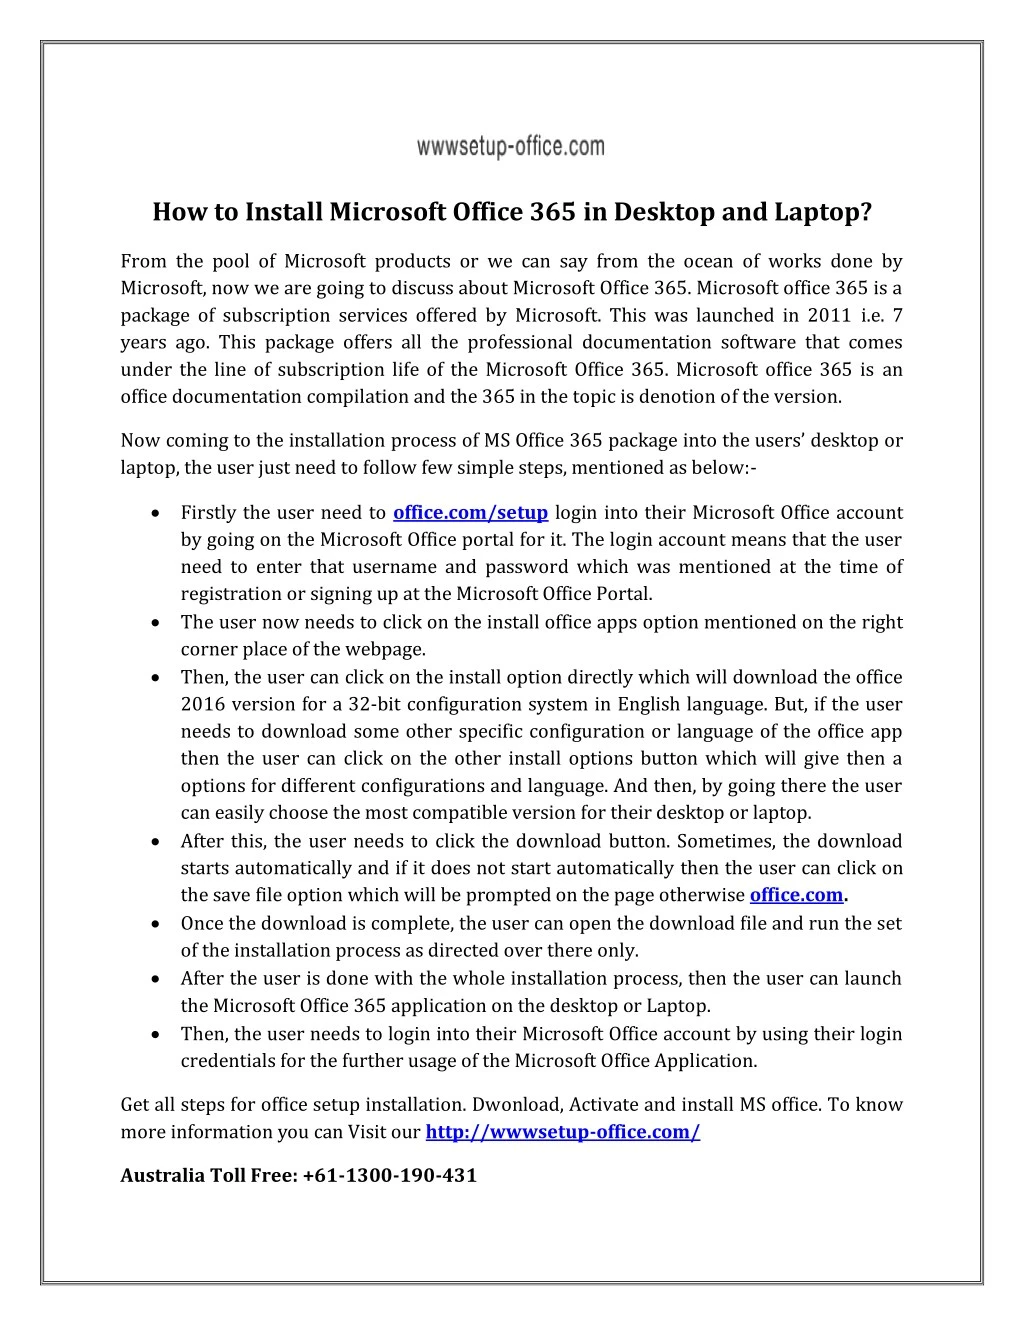 how to install microsoft office 365 in desktop